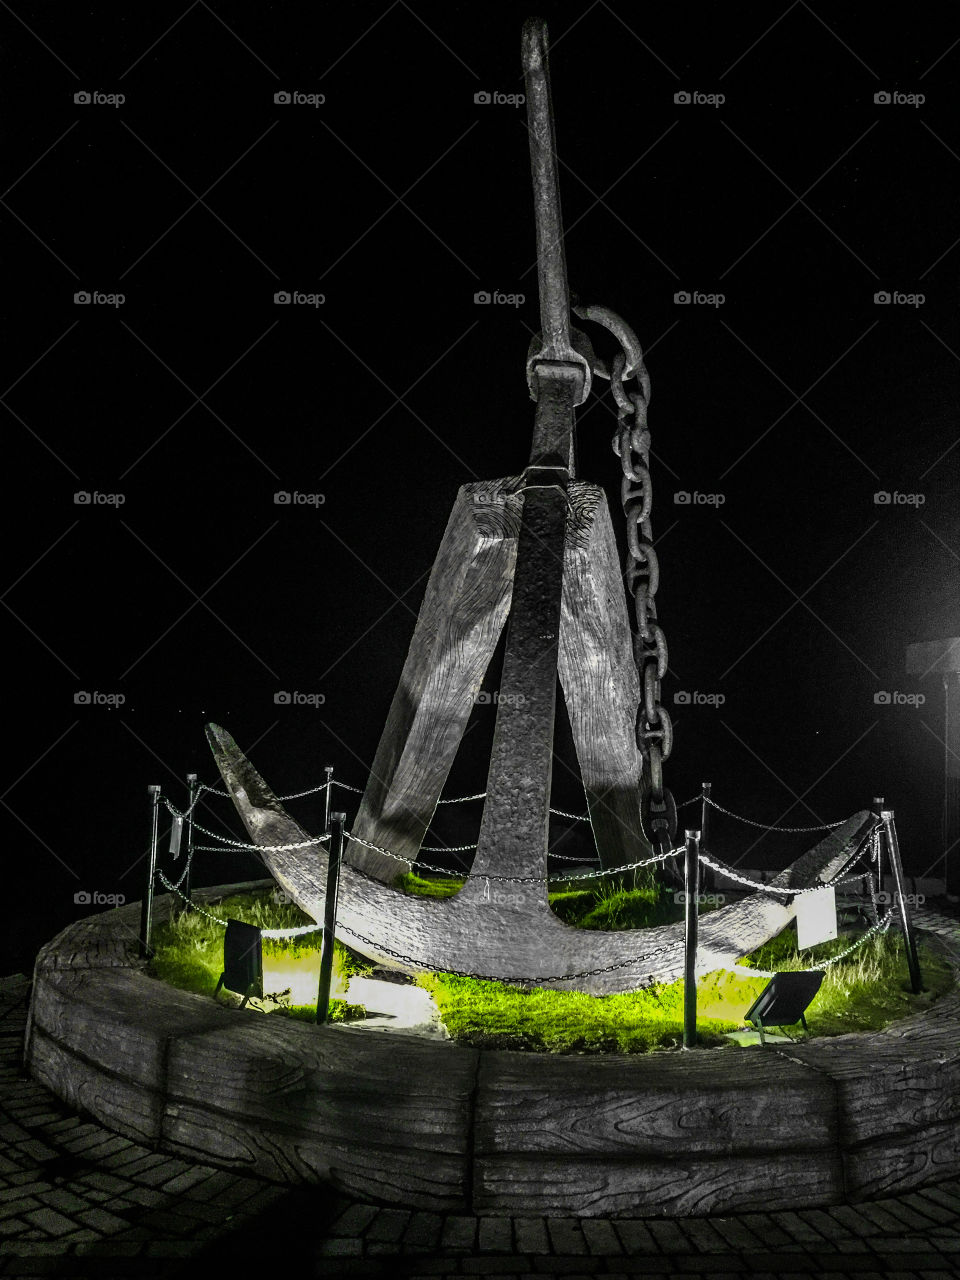 Anchor in the island